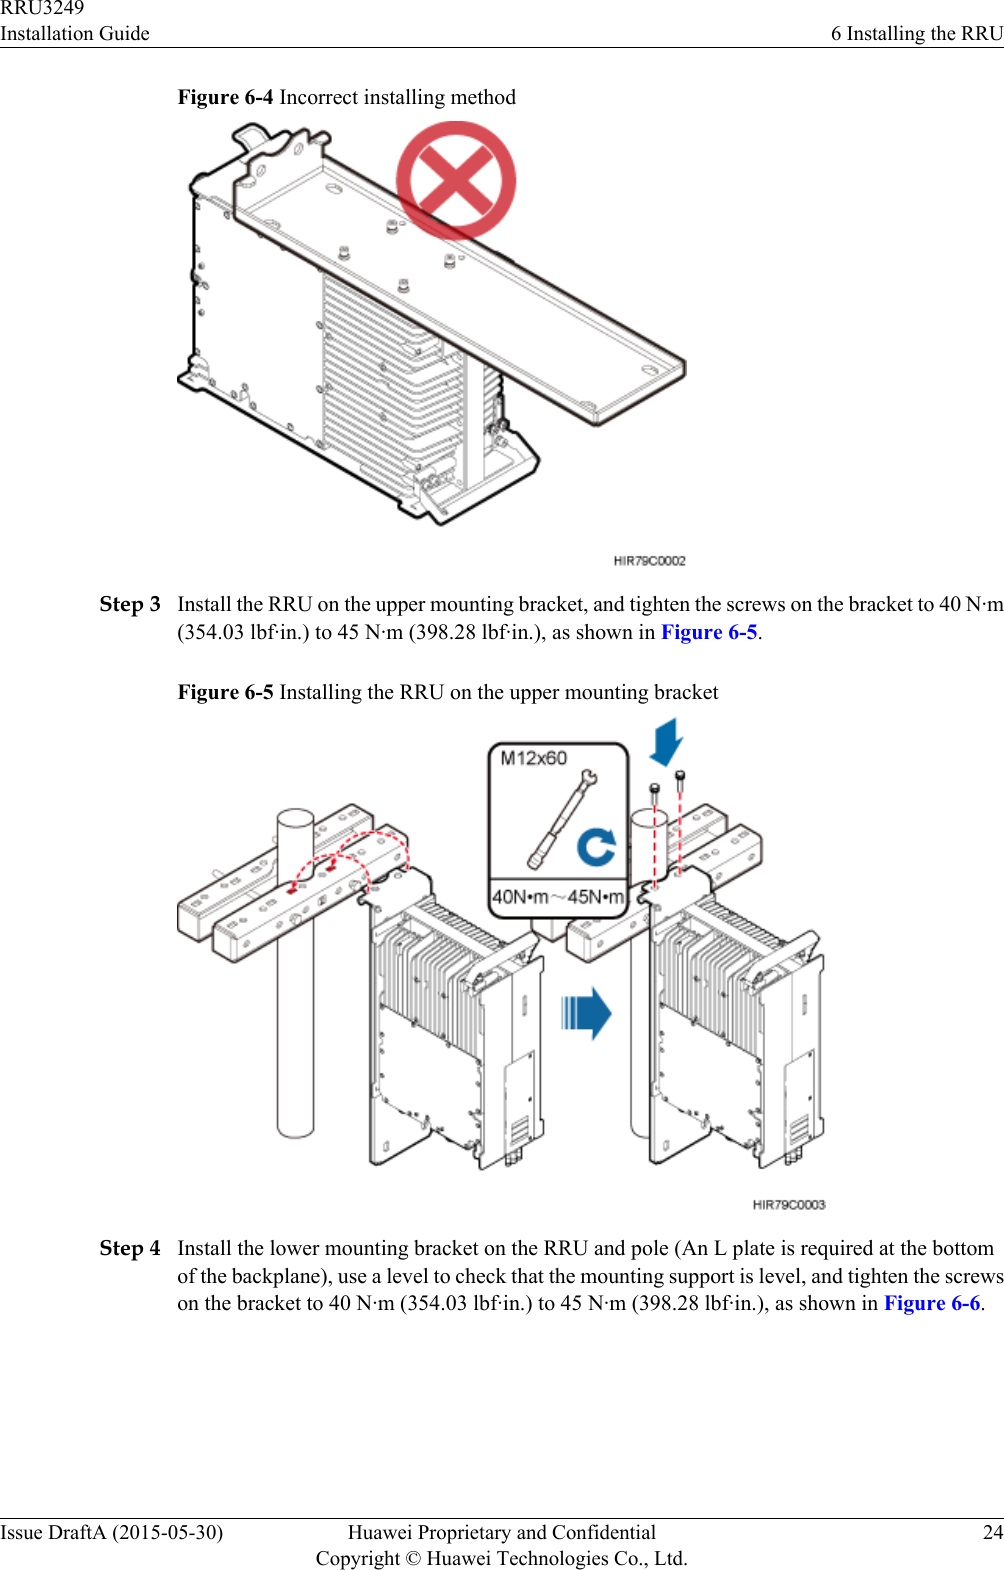 Figure 6-4 Incorrect installing methodStep 3 Install the RRU on the upper mounting bracket, and tighten the screws on the bracket to 40 N·m(354.03 lbf·in.) to 45 N·m (398.28 lbf·in.), as shown in Figure 6-5.Figure 6-5 Installing the RRU on the upper mounting bracketStep 4 Install the lower mounting bracket on the RRU and pole (An L plate is required at the bottomof the backplane), use a level to check that the mounting support is level, and tighten the screwson the bracket to 40 N·m (354.03 lbf·in.) to 45 N·m (398.28 lbf·in.), as shown in Figure 6-6.RRU3249Installation Guide 6 Installing the RRUIssue DraftA (2015-05-30) Huawei Proprietary and ConfidentialCopyright © Huawei Technologies Co., Ltd.24